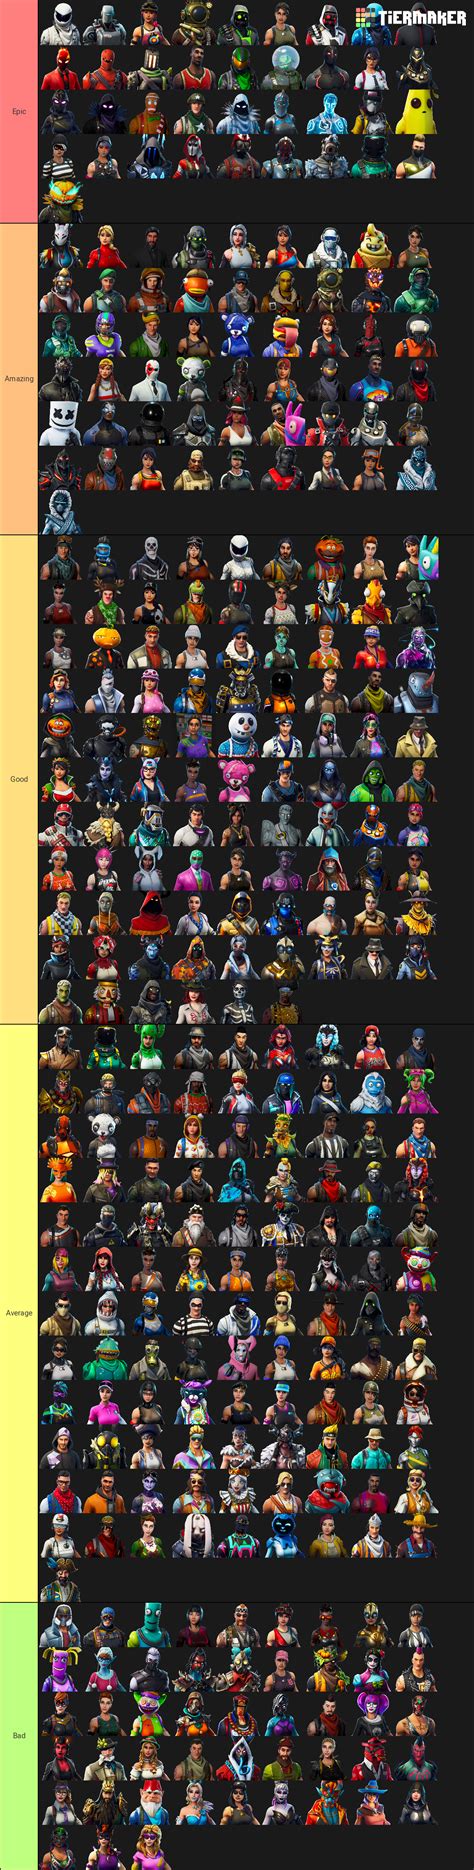 For information about our partners using cookies on our site, please see the partner list. Create a Fortnite Every Skin Tier List - TierMaker